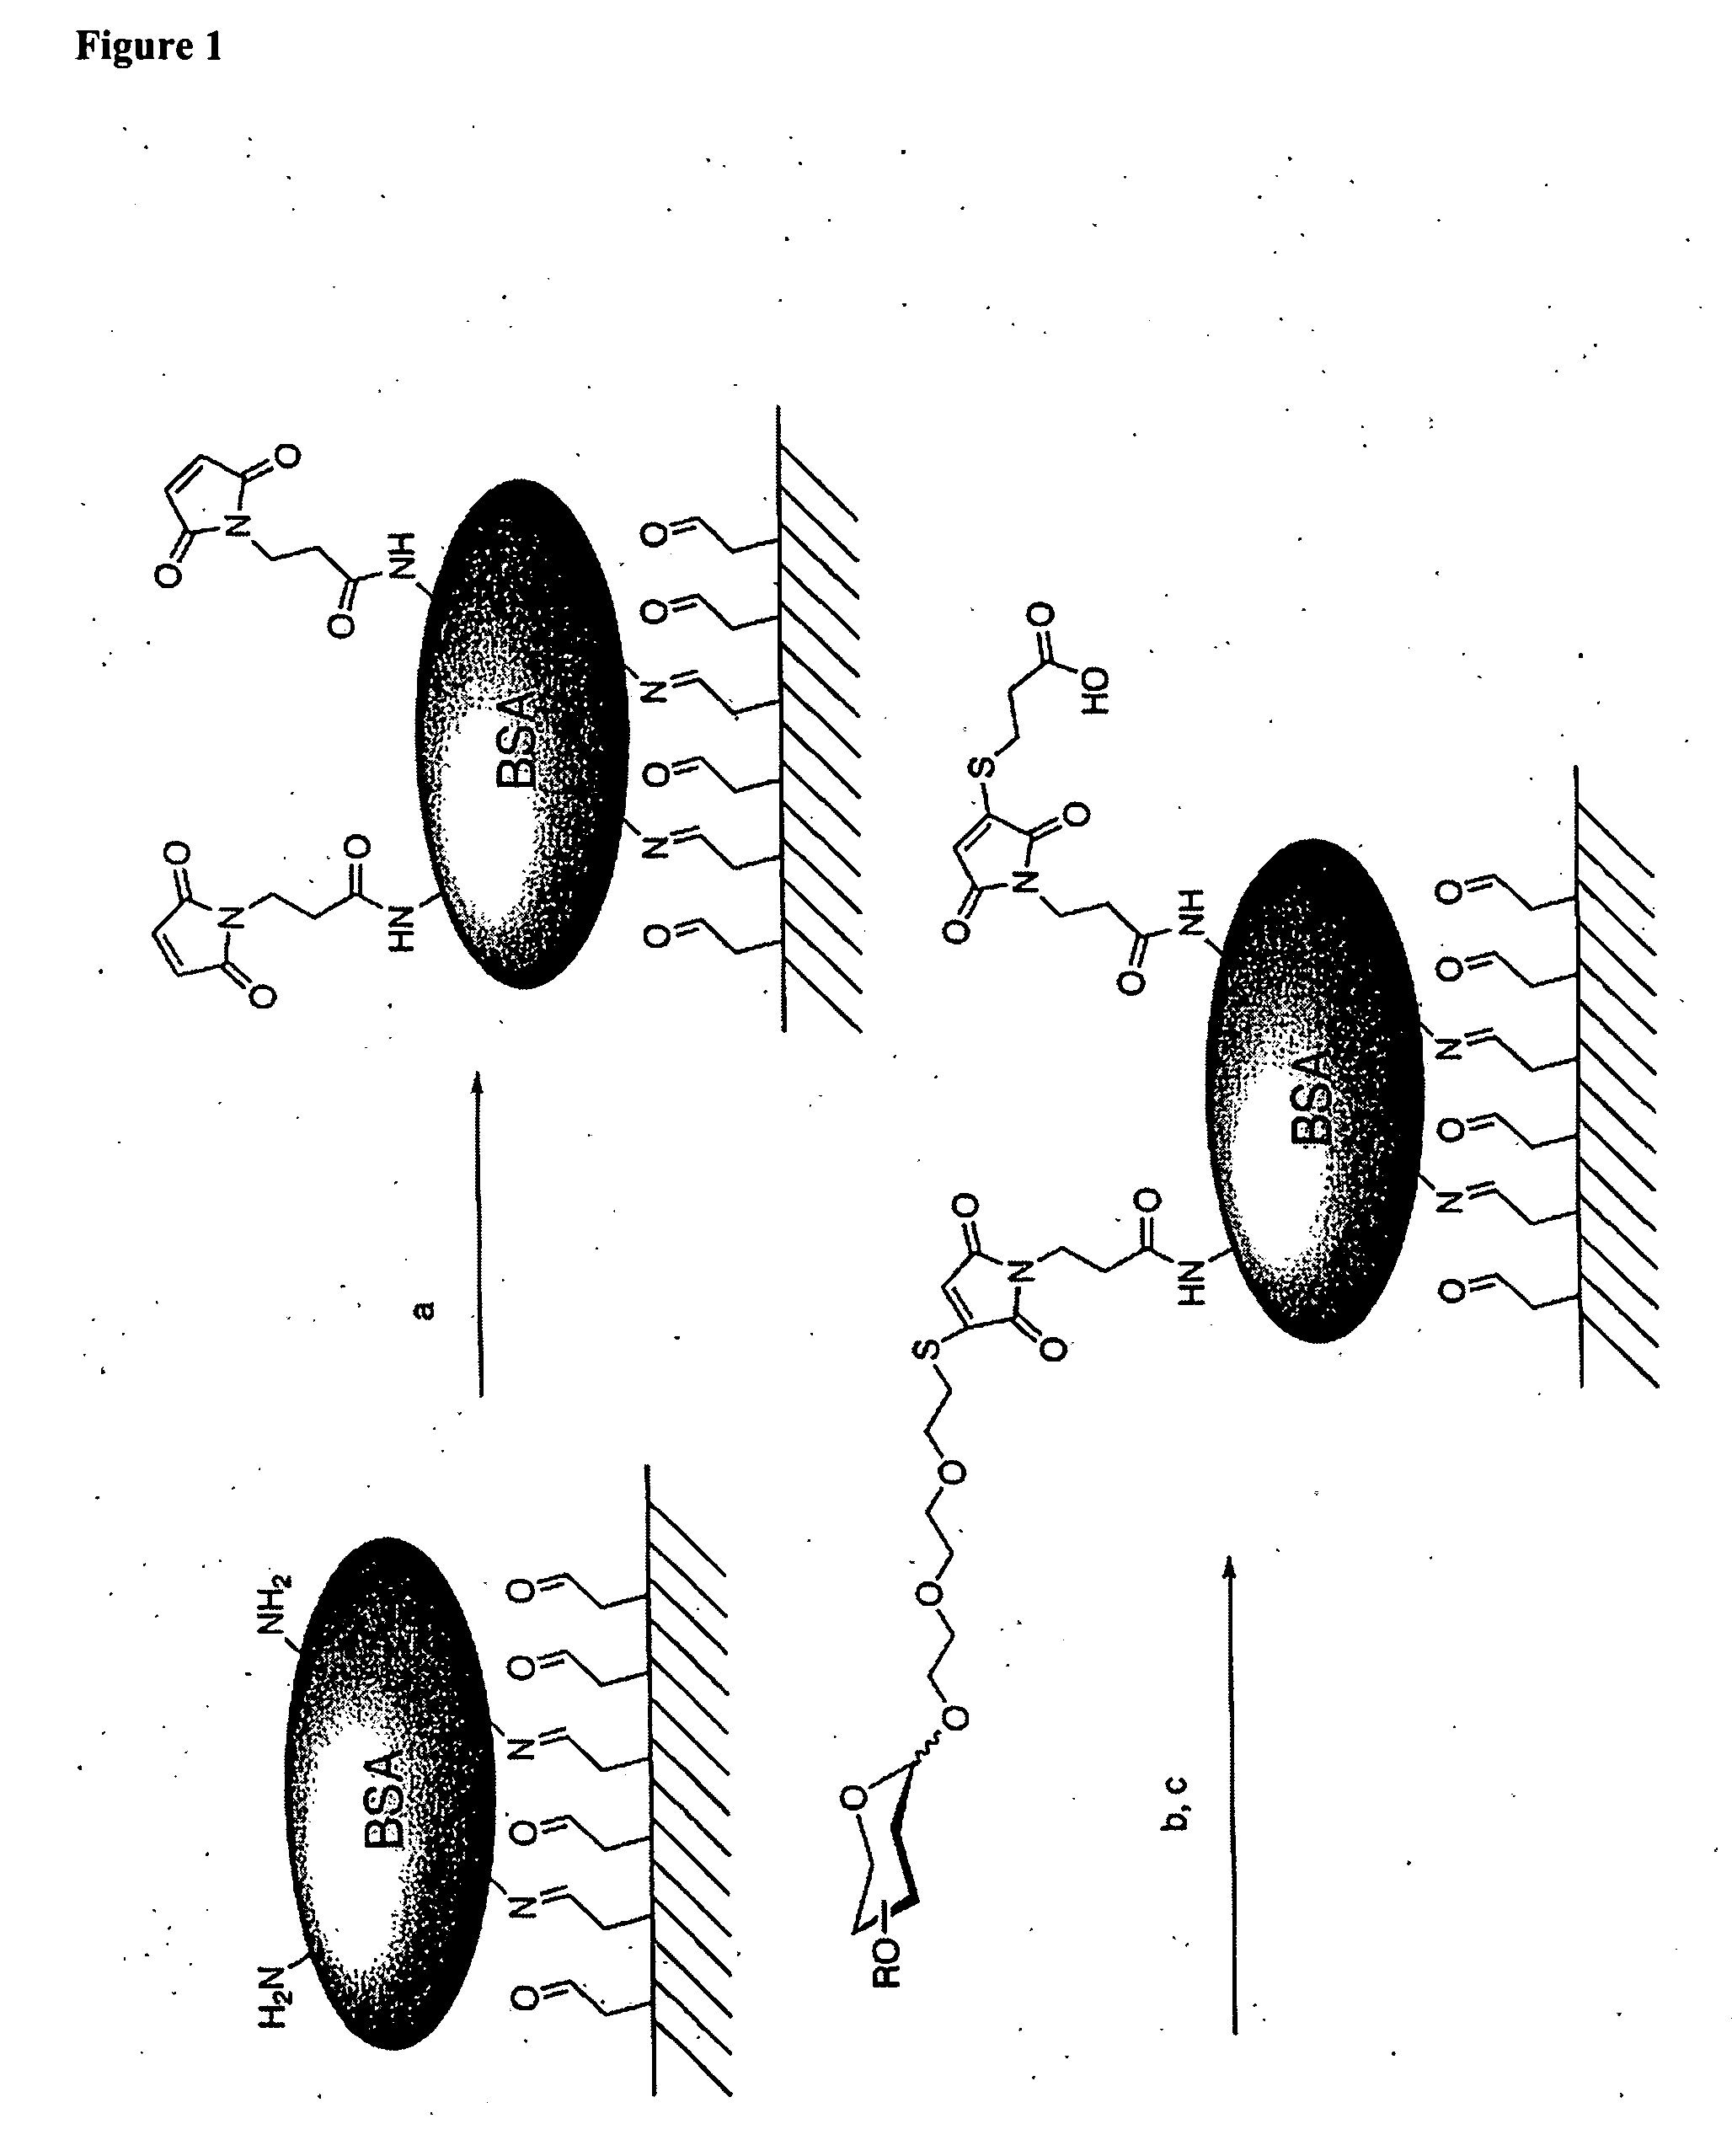 Microarrays and microspheres comprising oligosaccharides, complex carbohydrates or glycoproteins